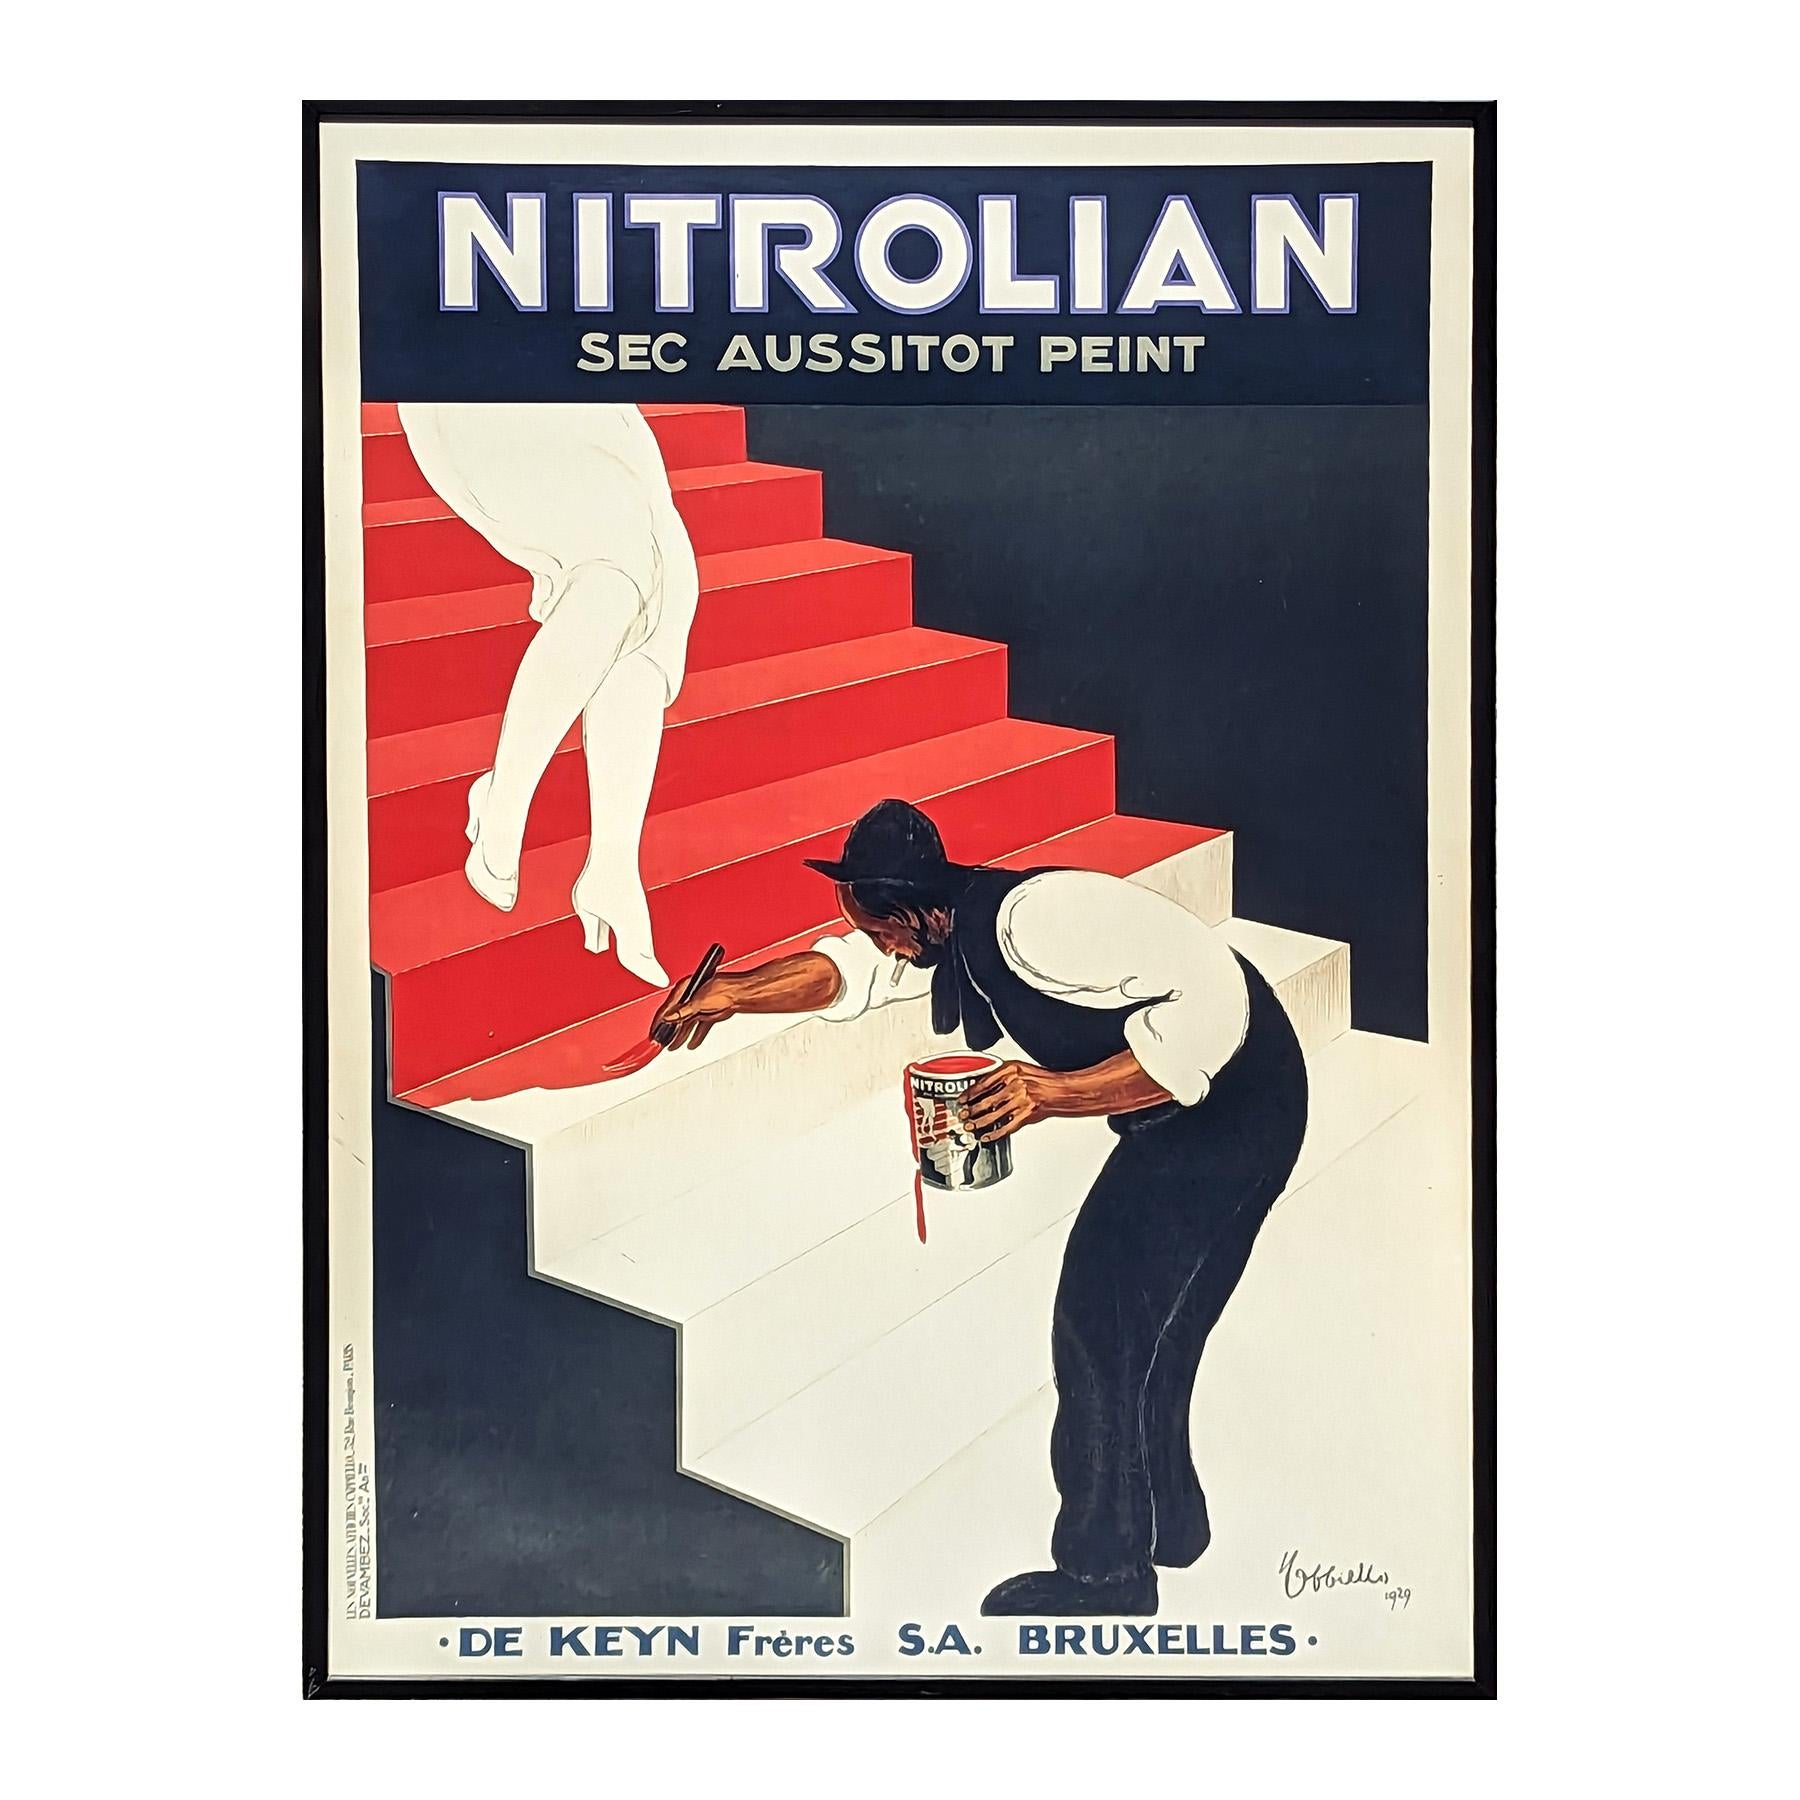 French Vintage Modern Art Deco Nitrolian Fast Drying Paint Promotional Poster  - Print by Leonetto Cappiello